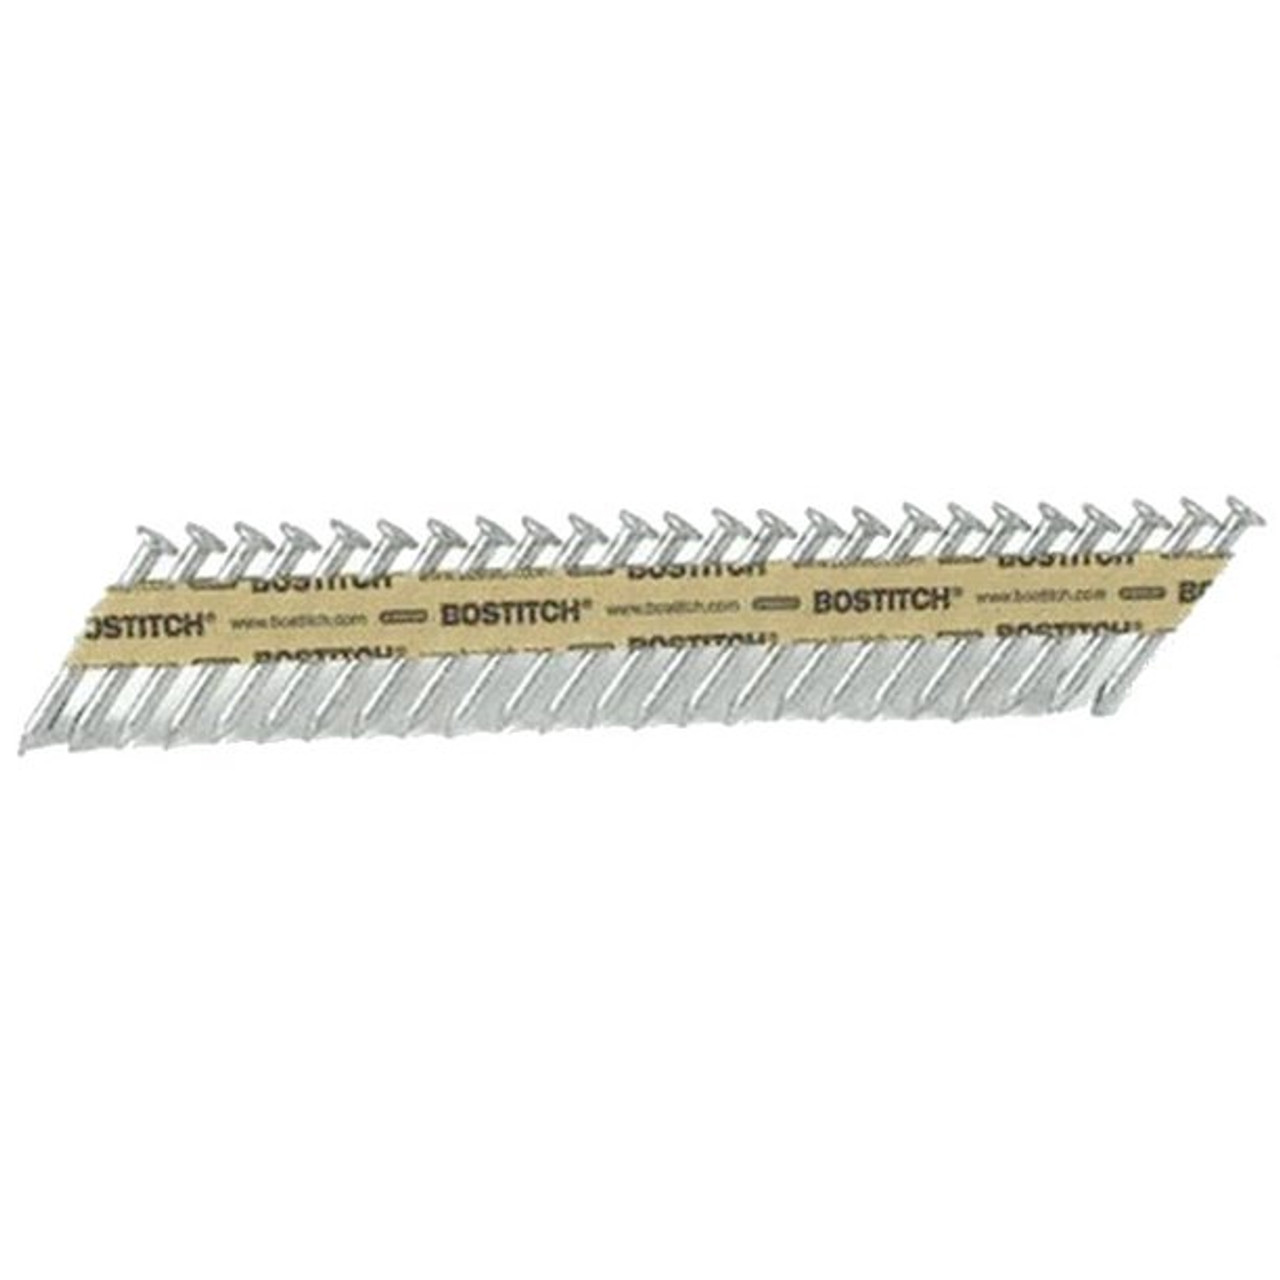 BOSTITCH Paper Tape Collated Metal Connector Nails, Galvanized